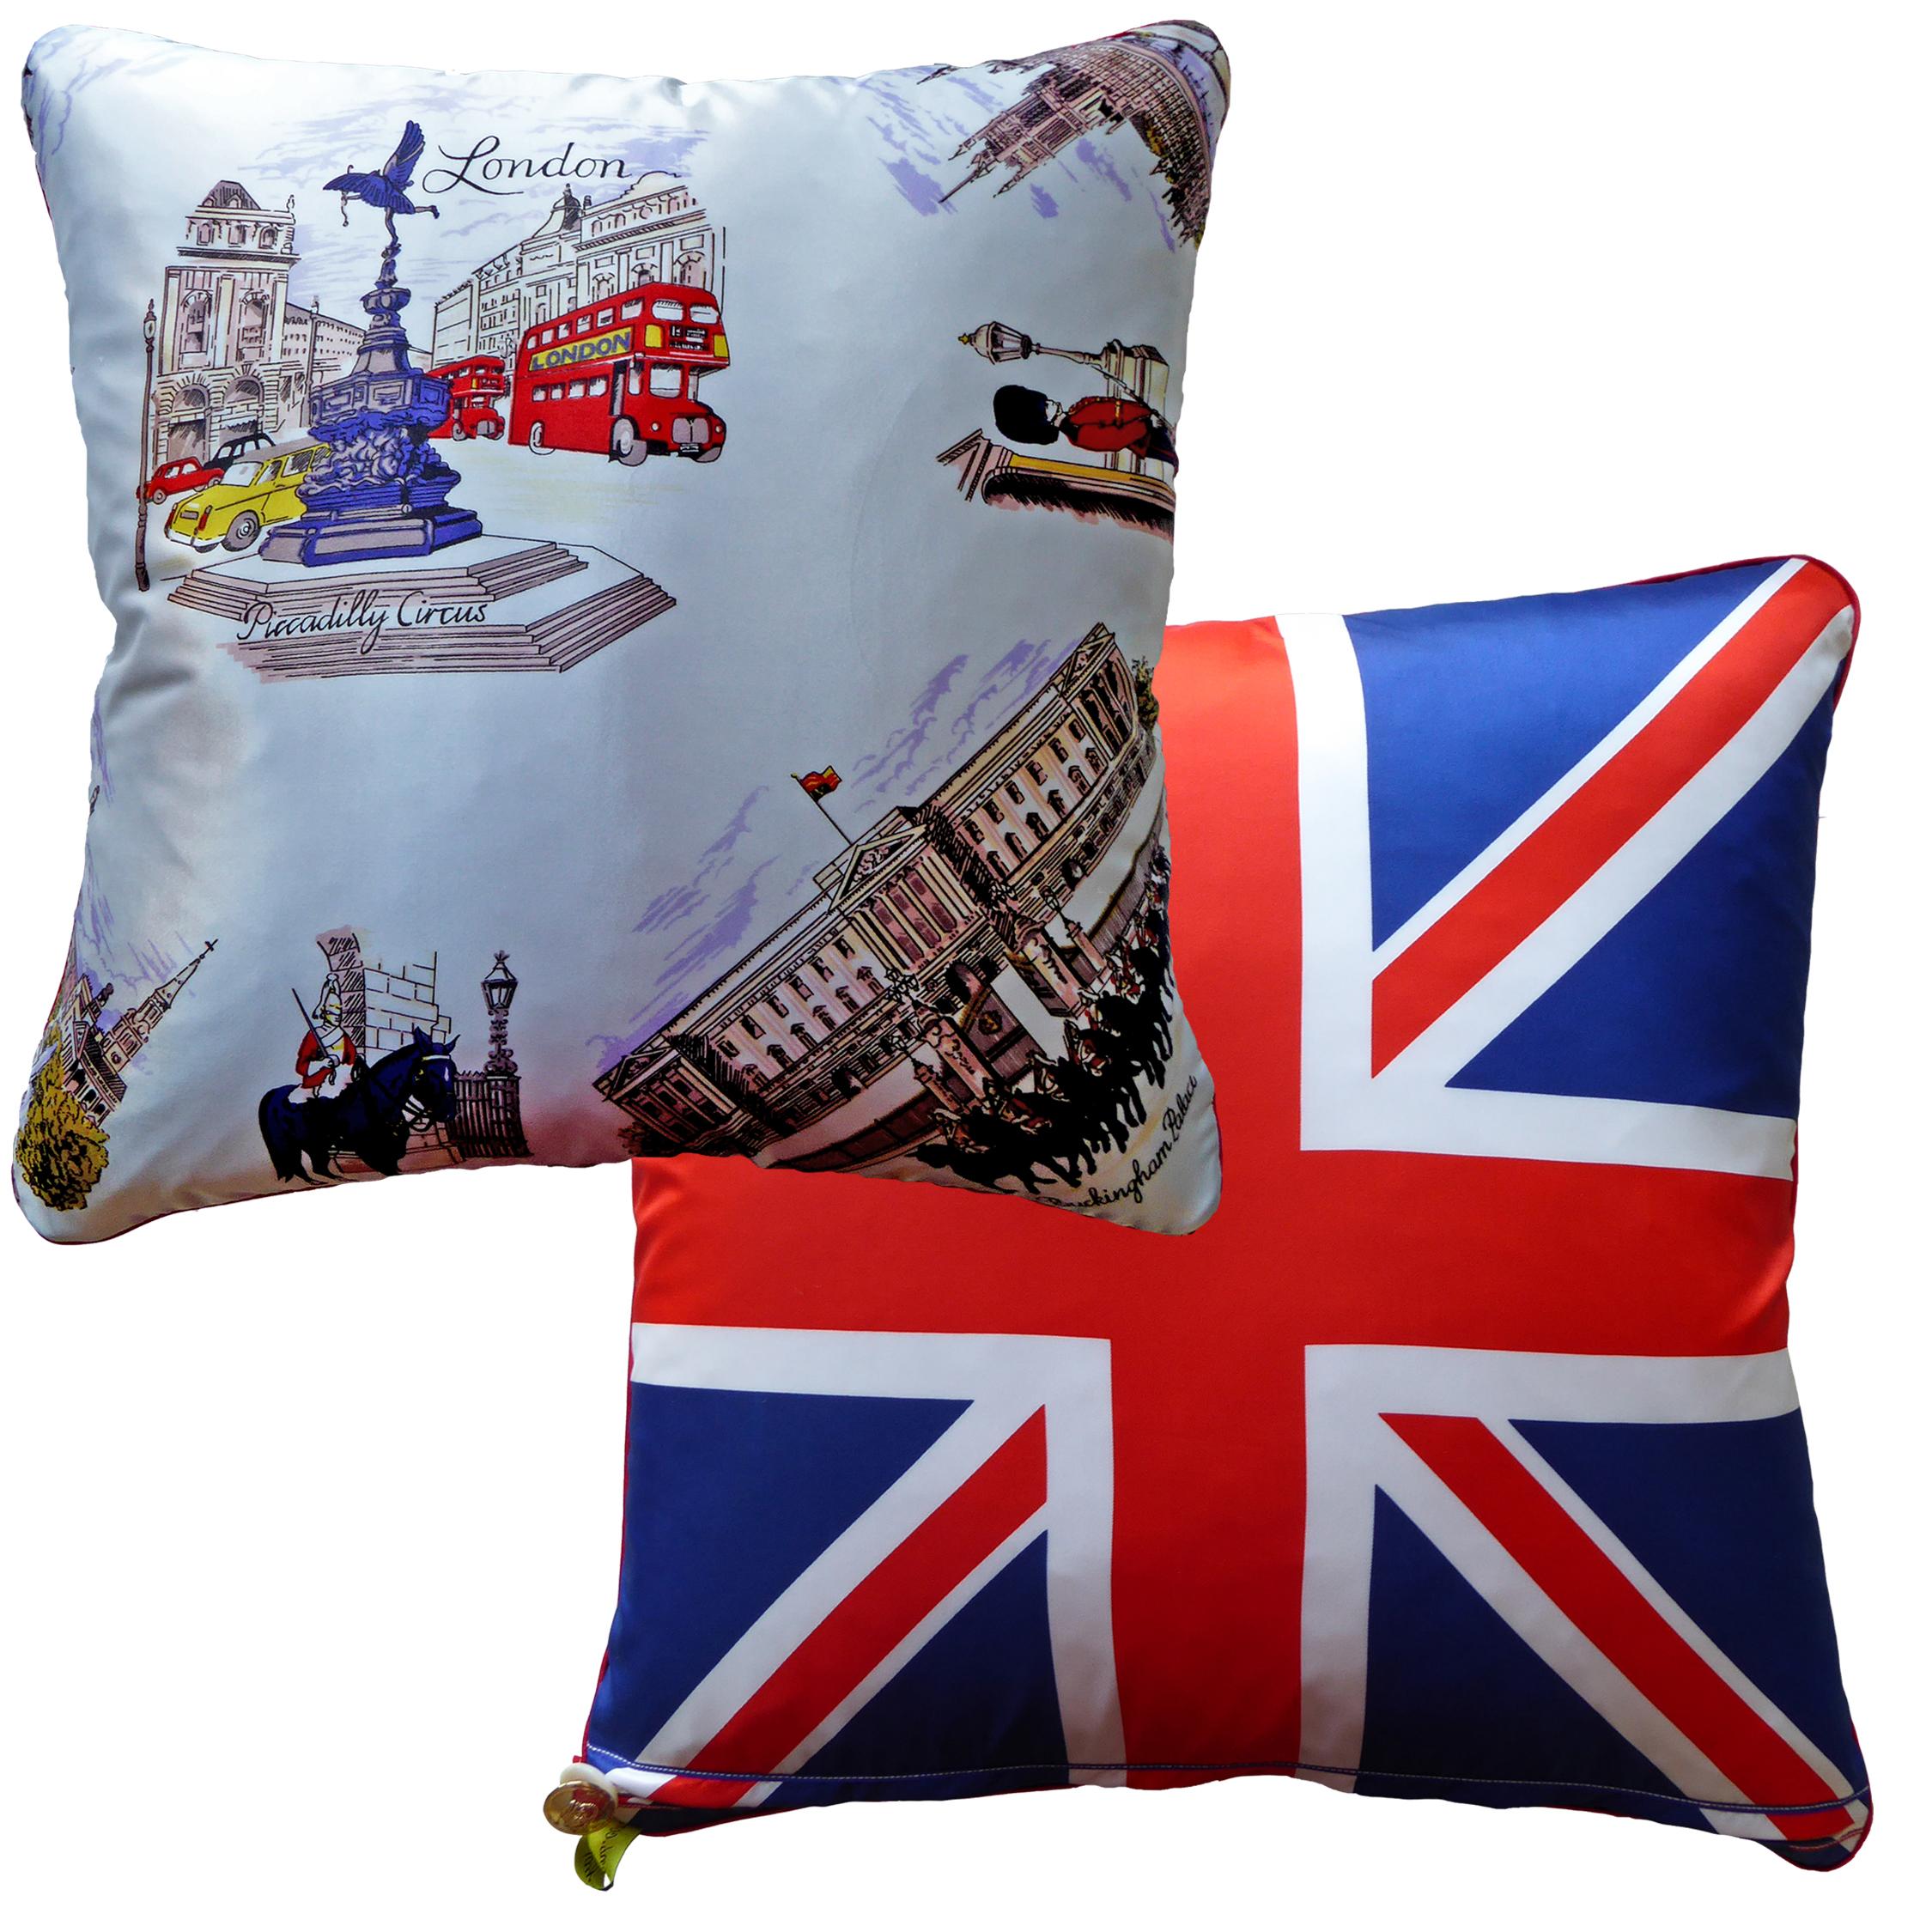 Organic Modern 'Vintage Cushions' Luxury Bespoke Luxury Pillow ‘Piccadilly Circus', Made in UK